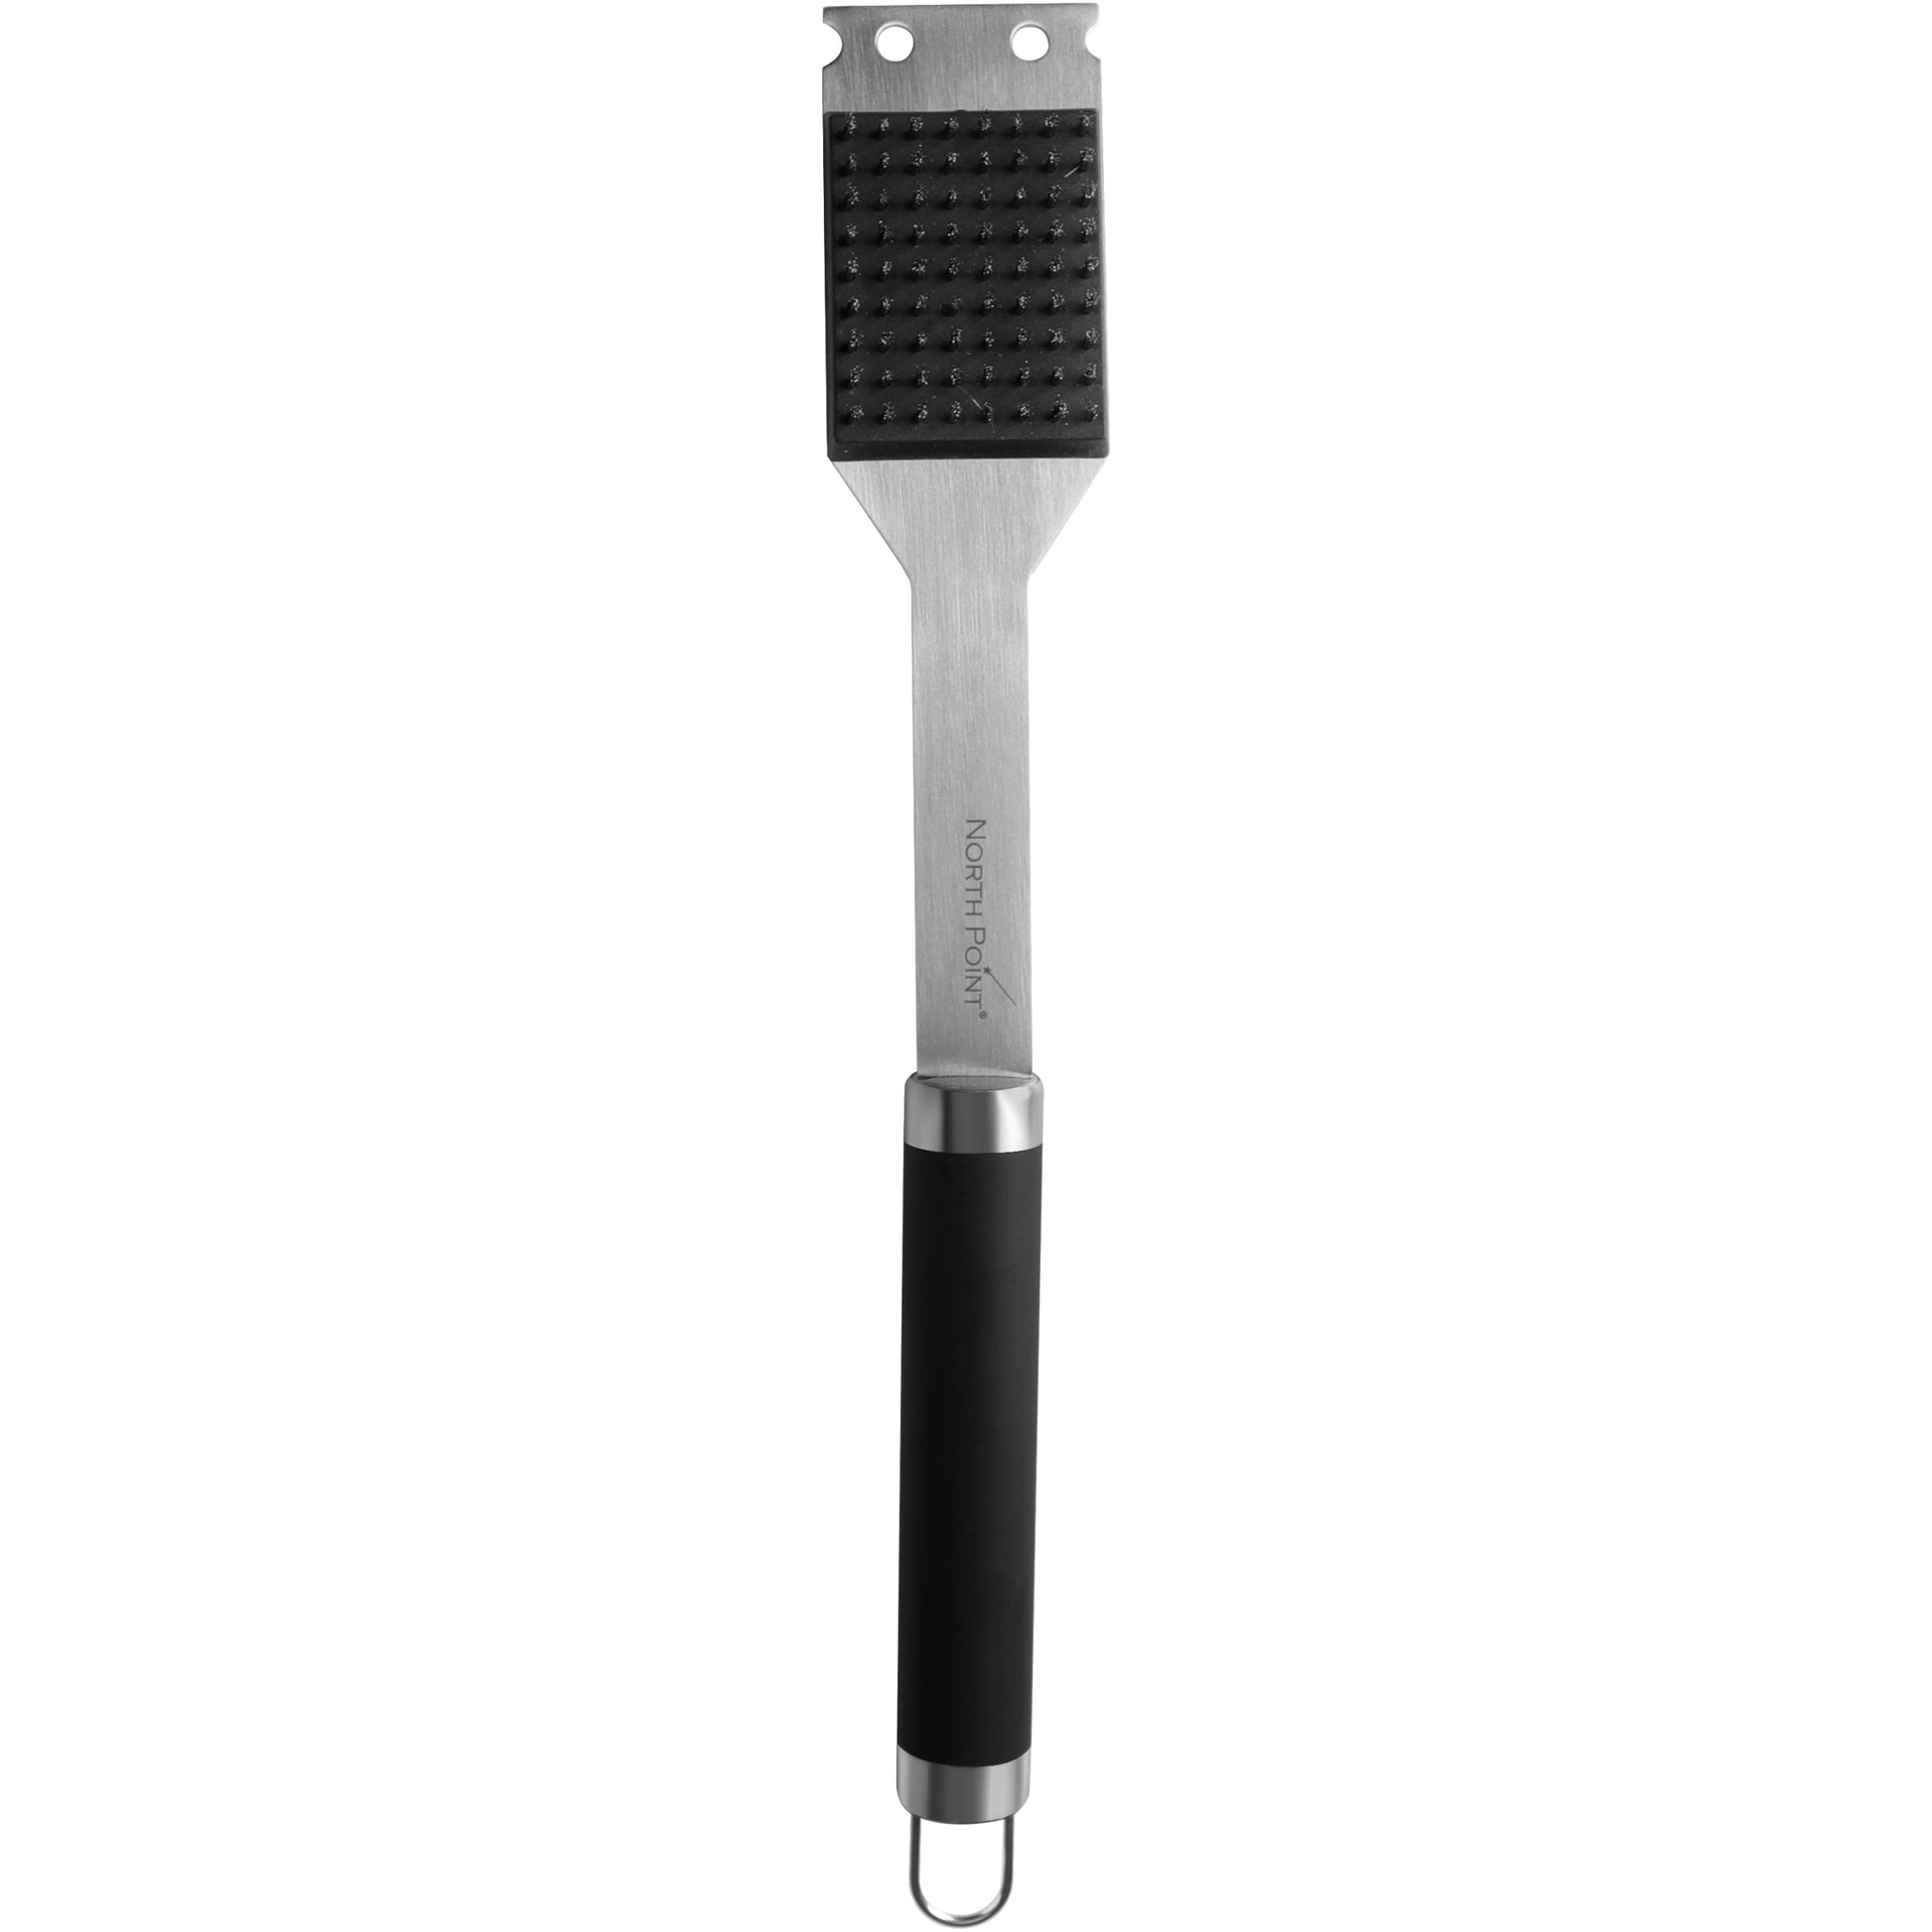 North Point® Grill Brush with a black handle